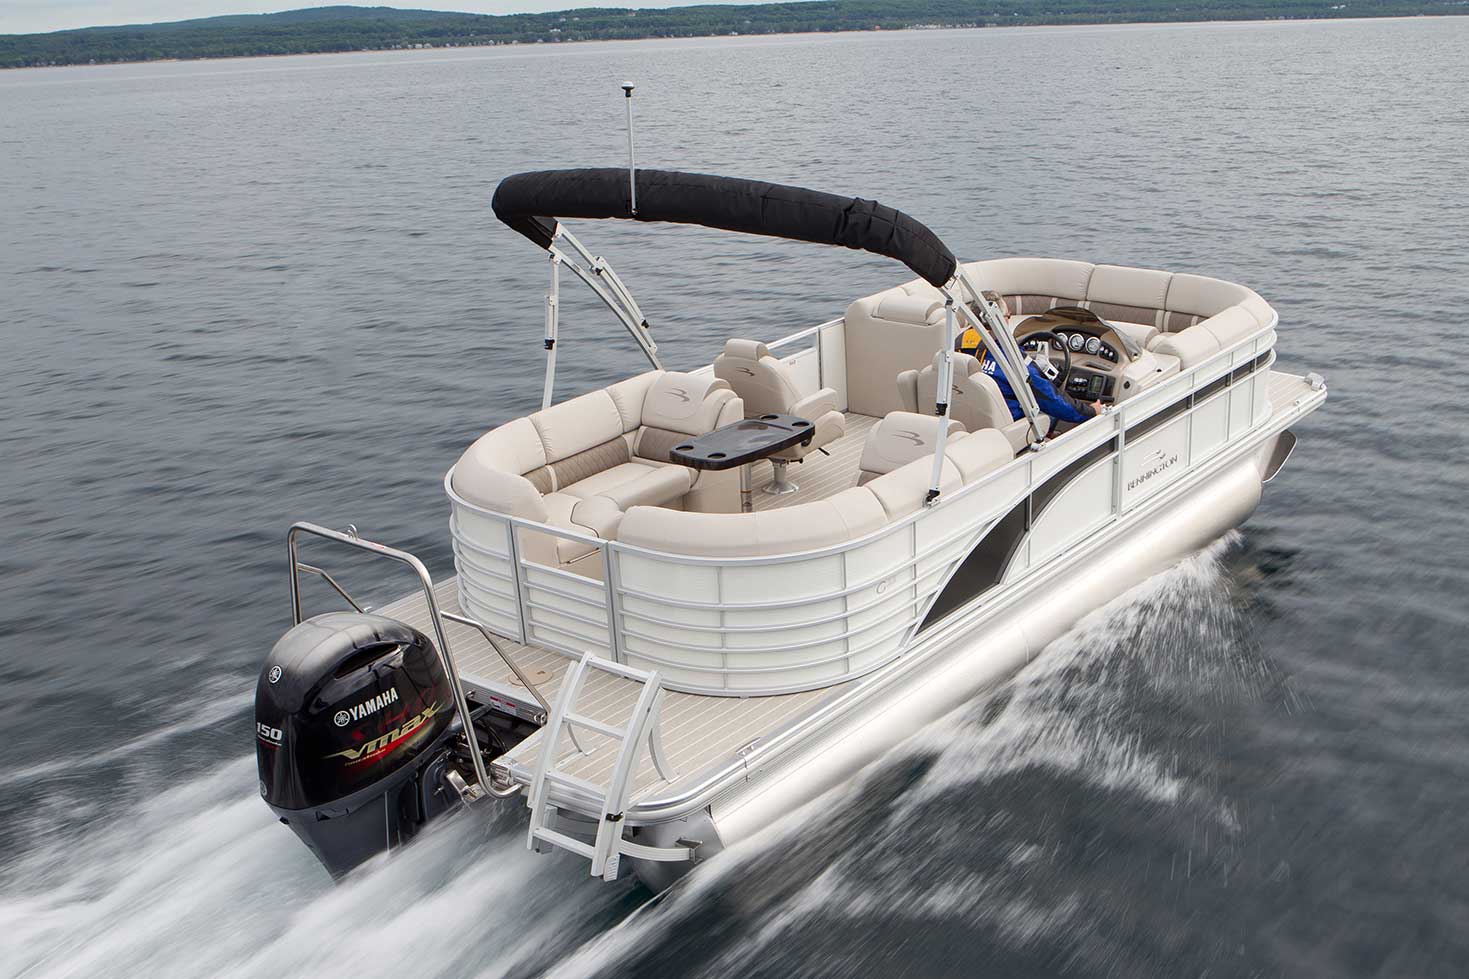 Zoom, zoon. The Bennington 2250 GSR has plenty of speed on tap with its Yamaha 150 VMAX SHO outboard. 